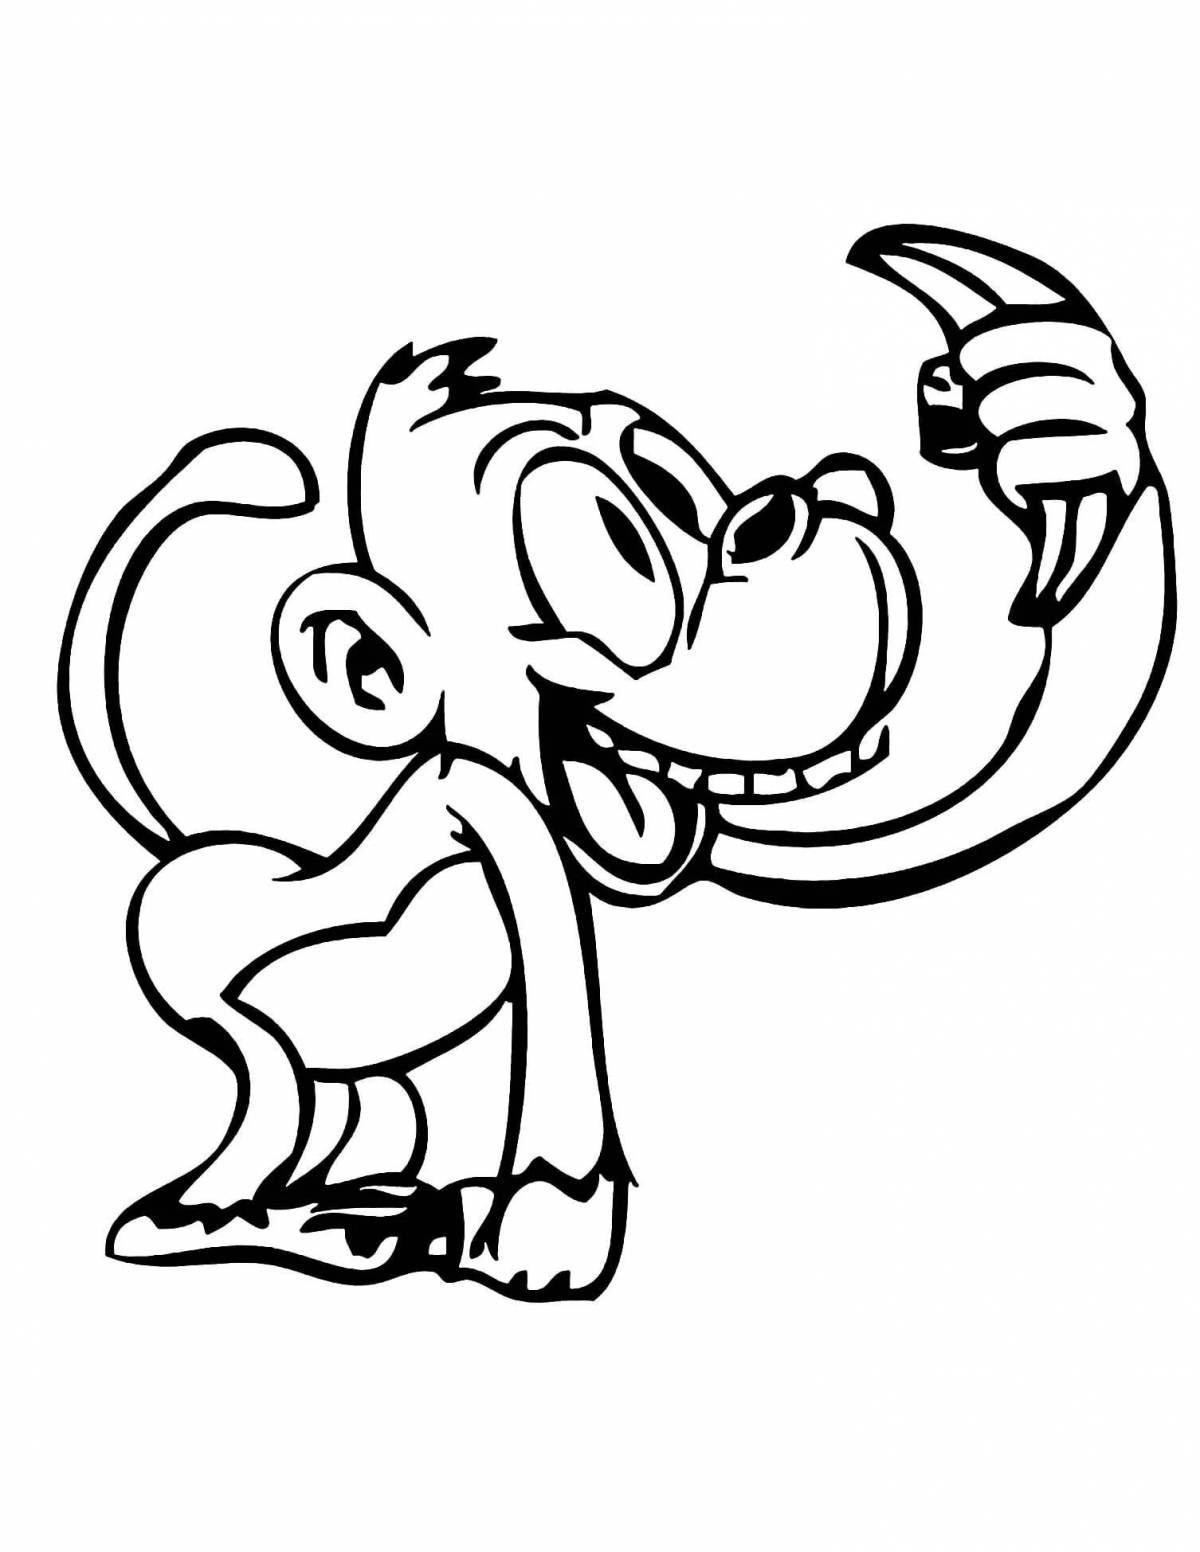 Monkey figurine coloring page